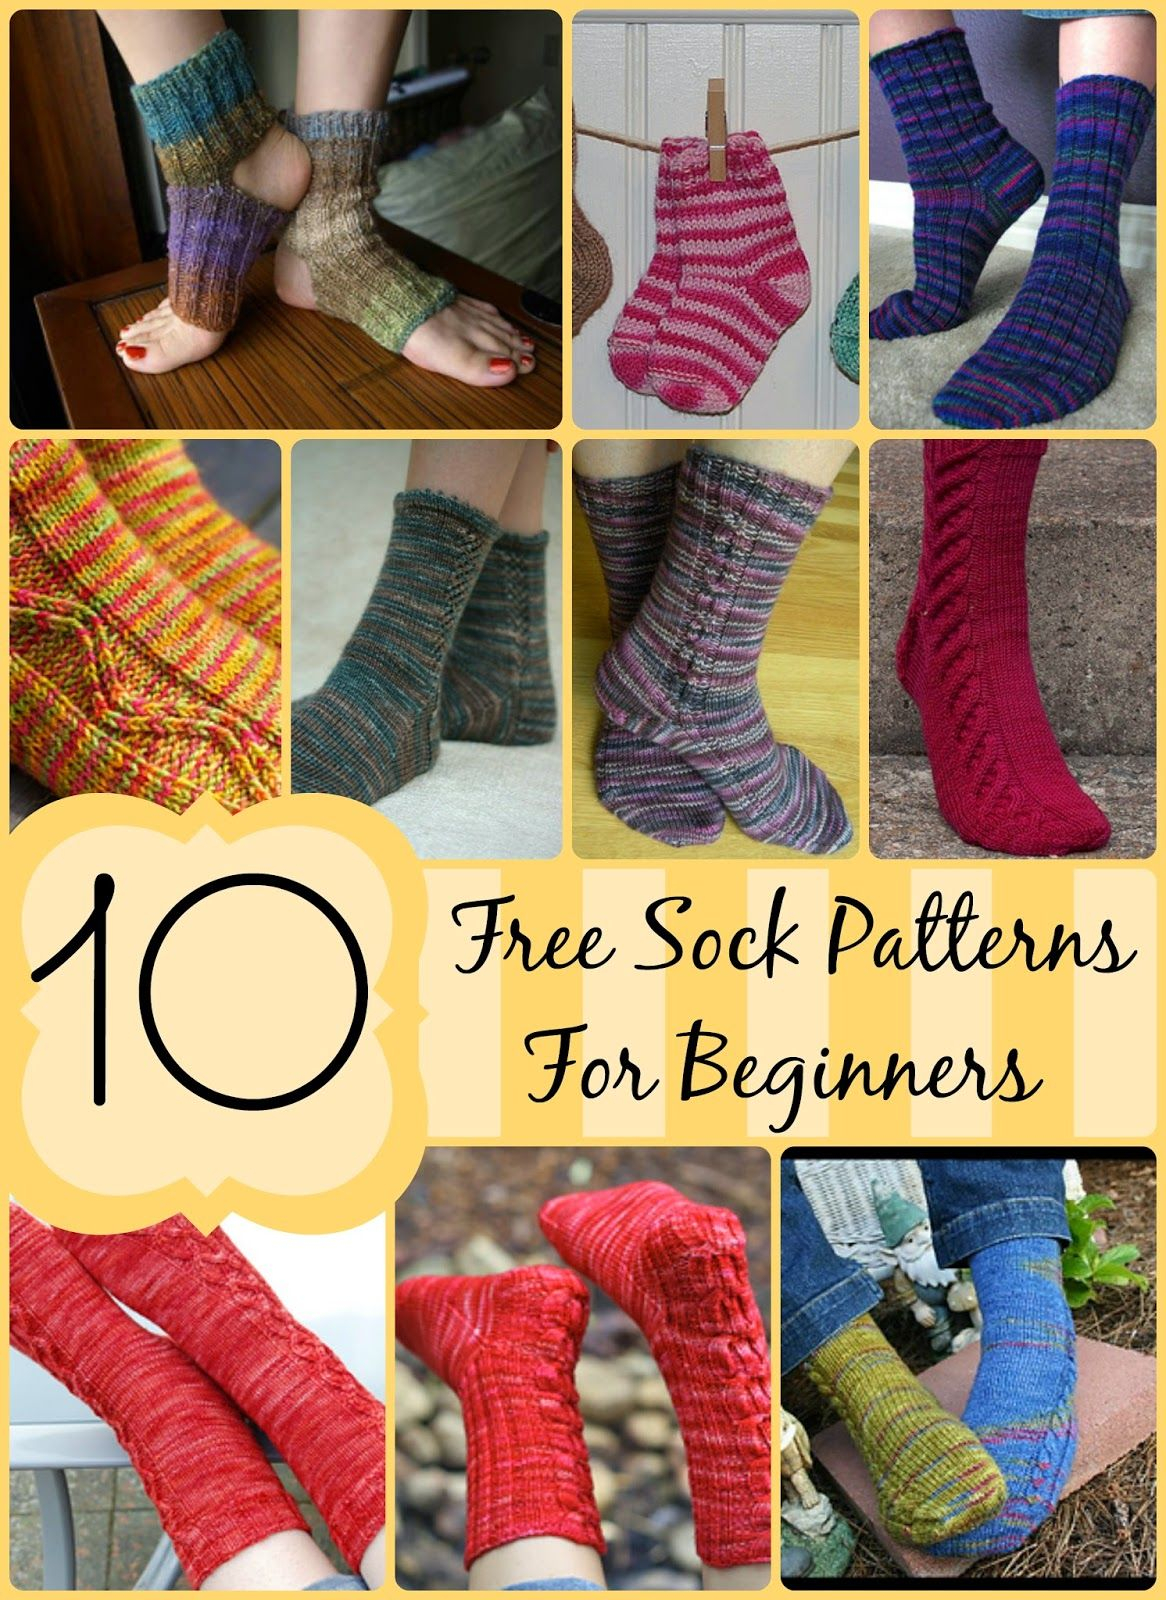 Easy Bed Socks Crochet Pattern 10 Free Sock Patterns For Beginners Easy Patterns To Make Your Way